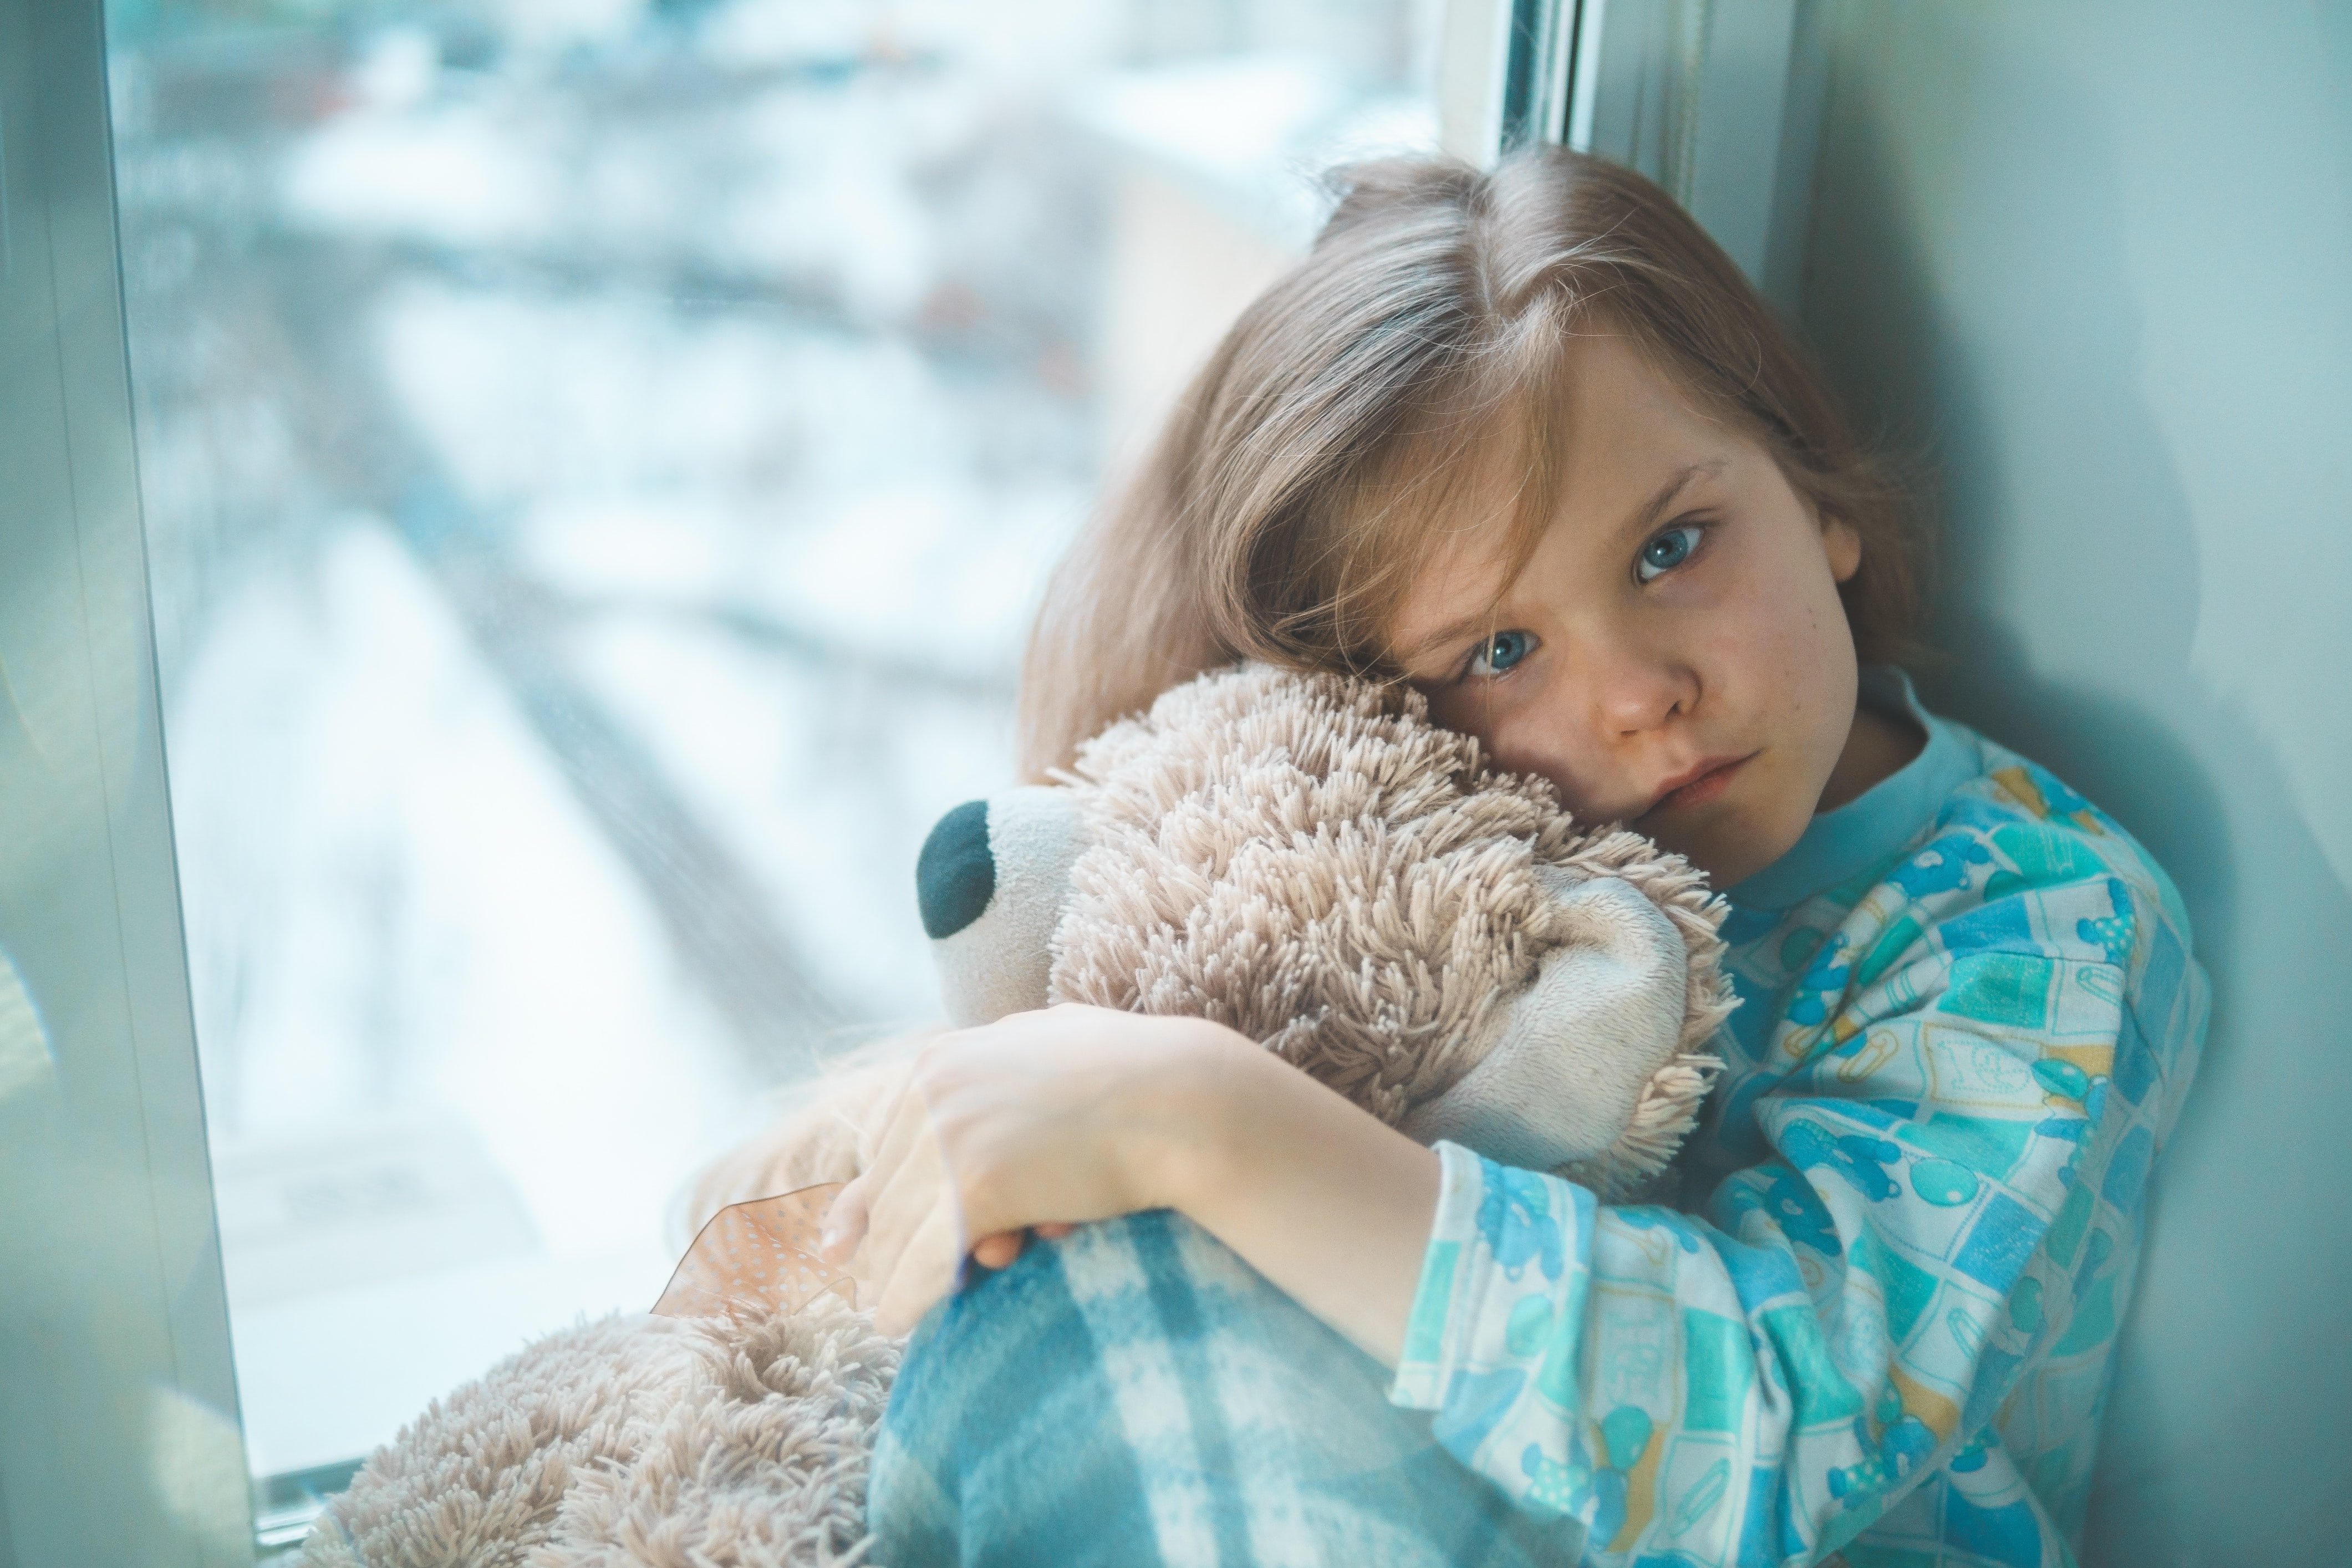 Millie started working with a charity that helped sick children. | Source: Unsplash